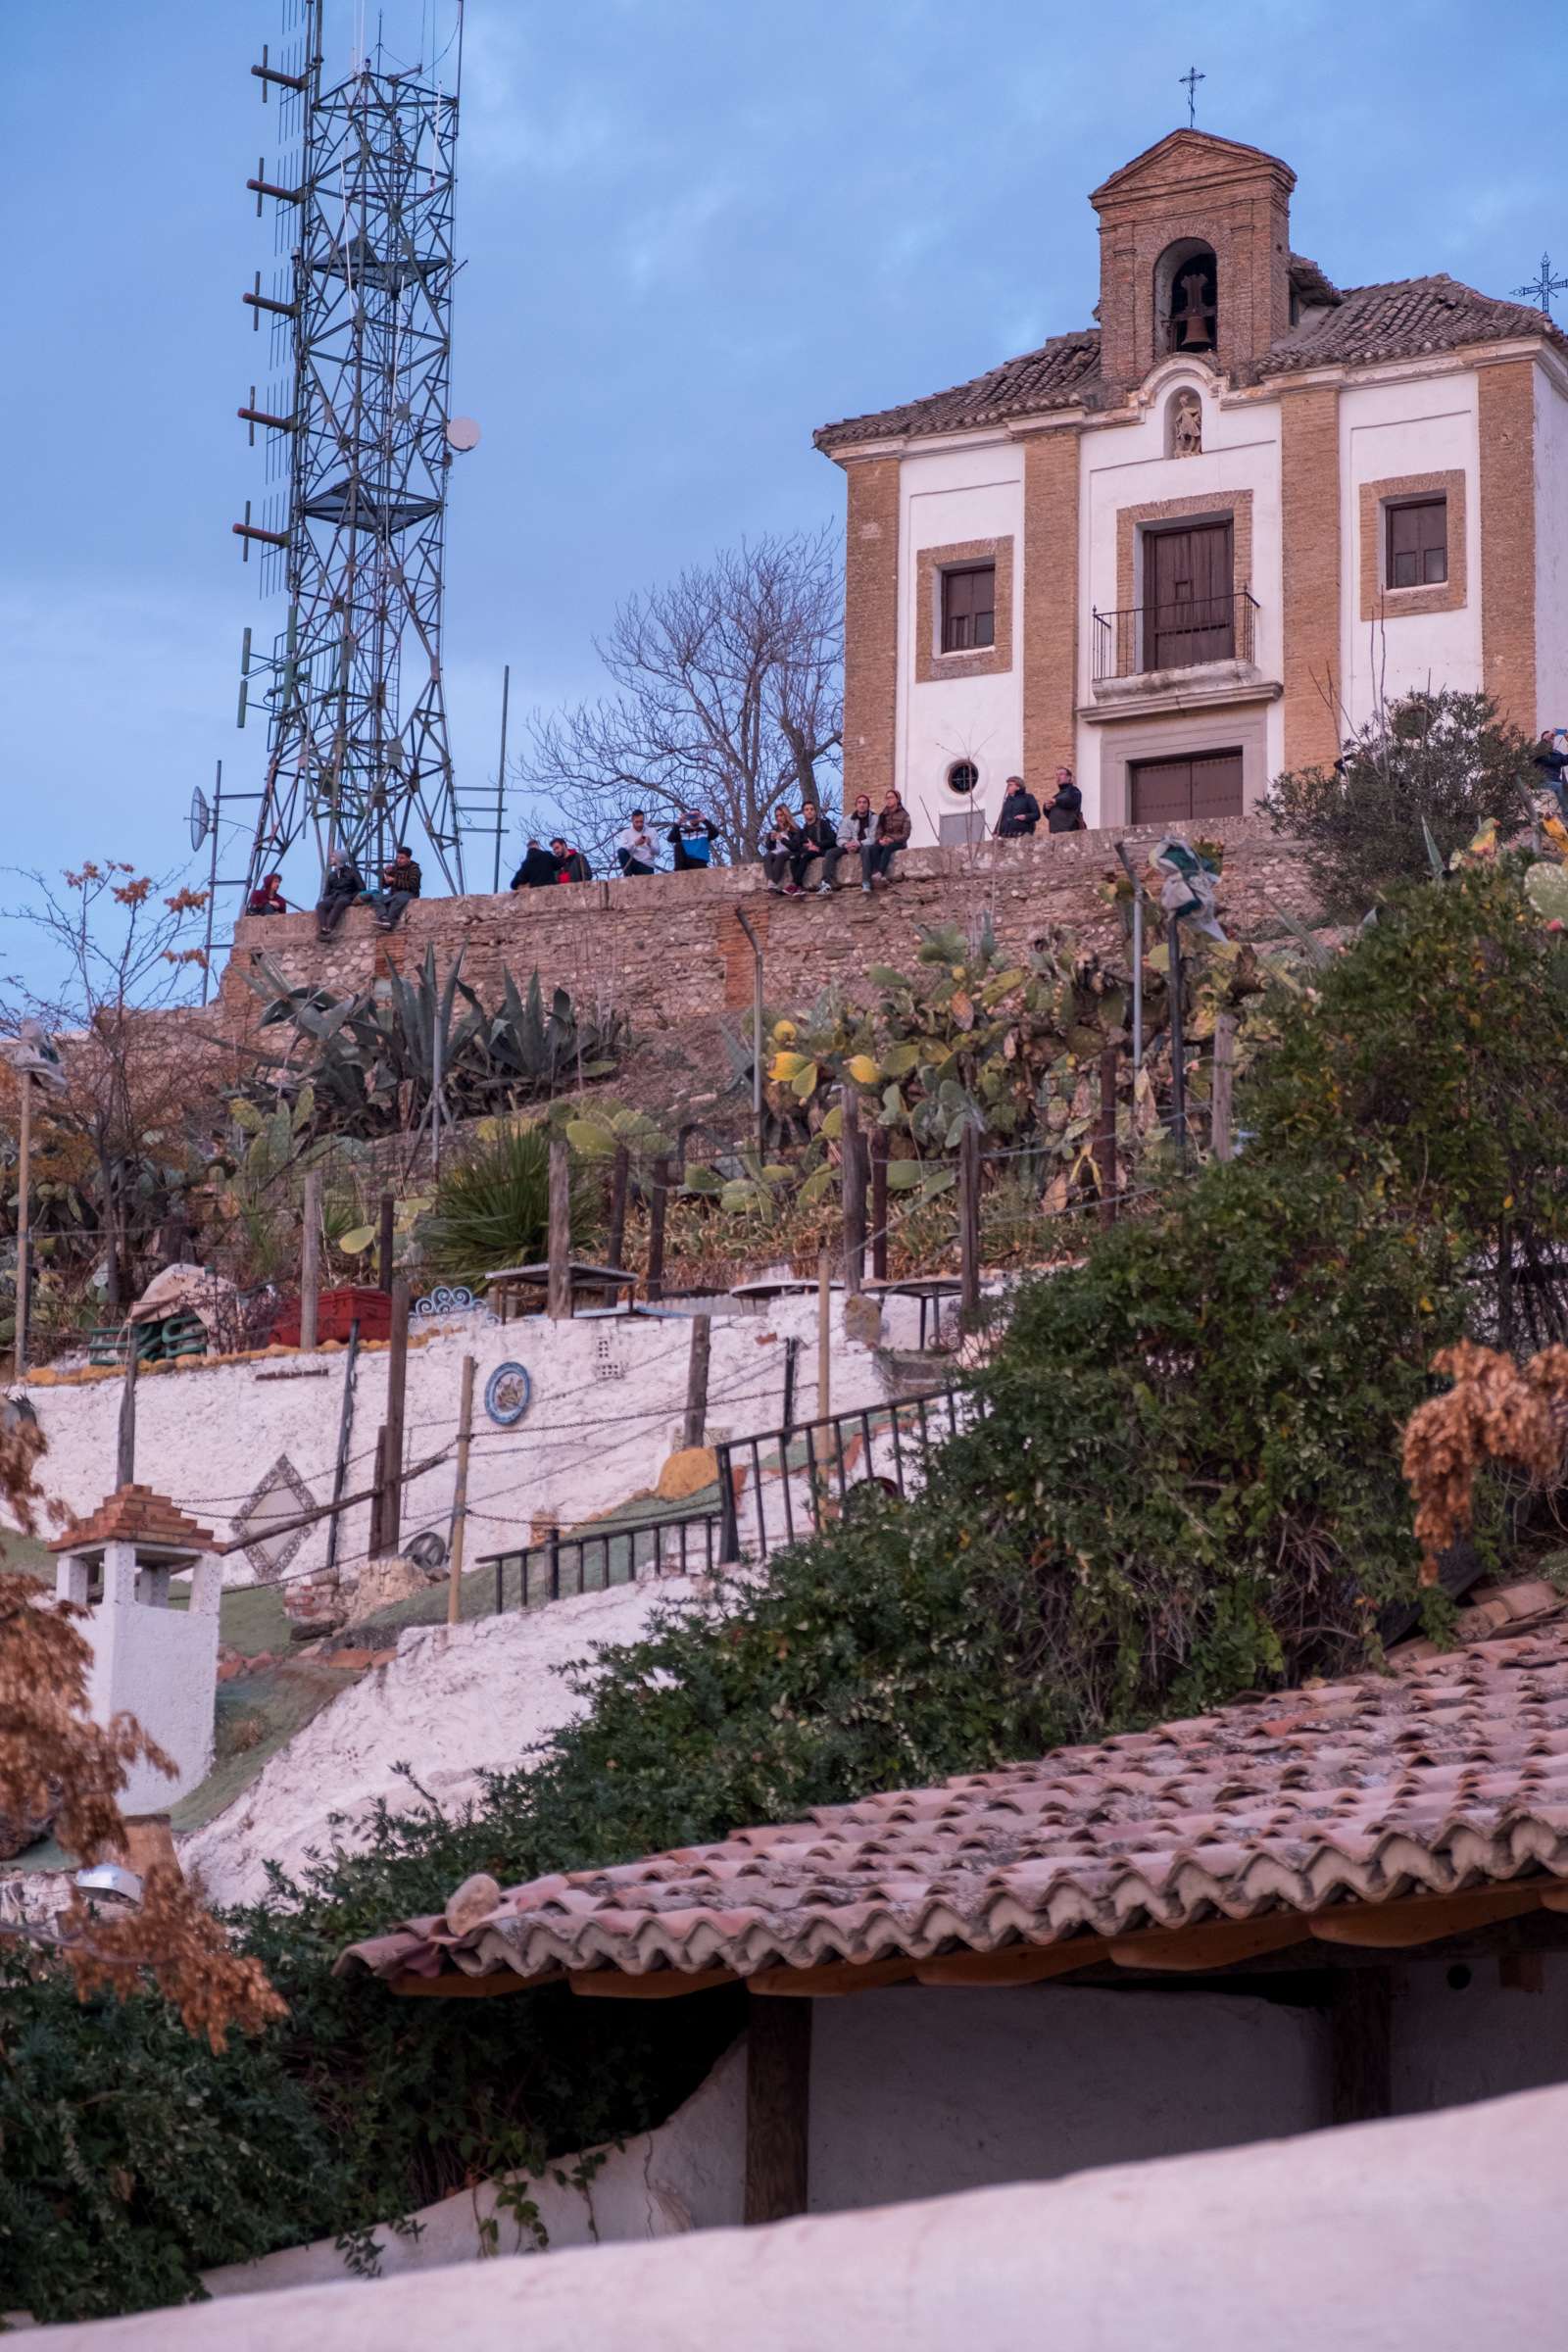 People sitting on a wall watching the sunset at Saint Michael Viewpoint, Granada